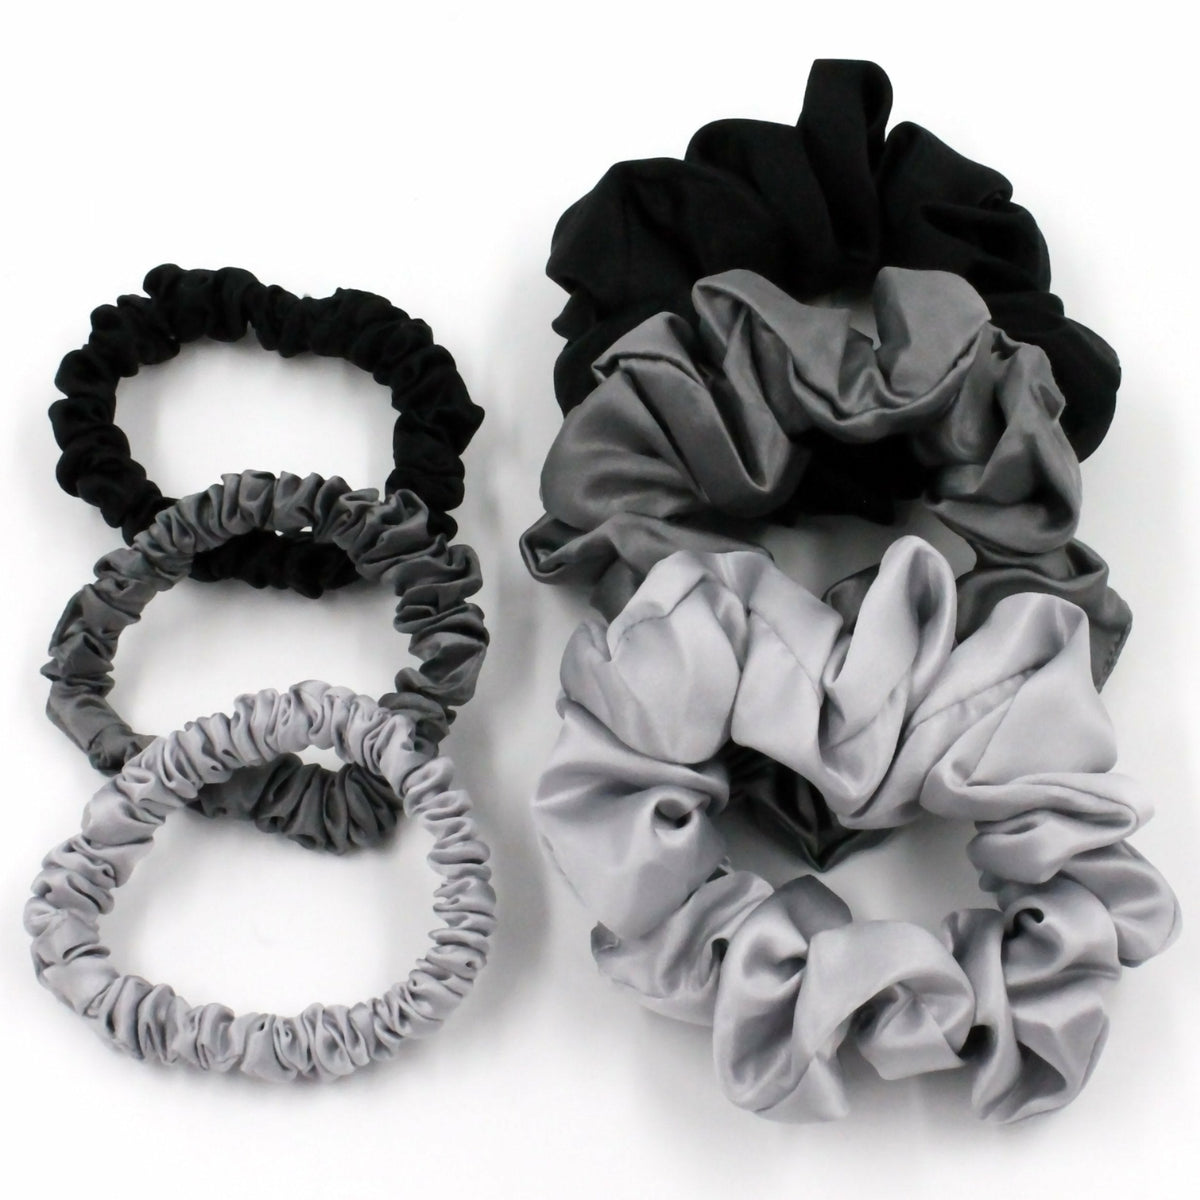 Black Ponies and White Scrunchies